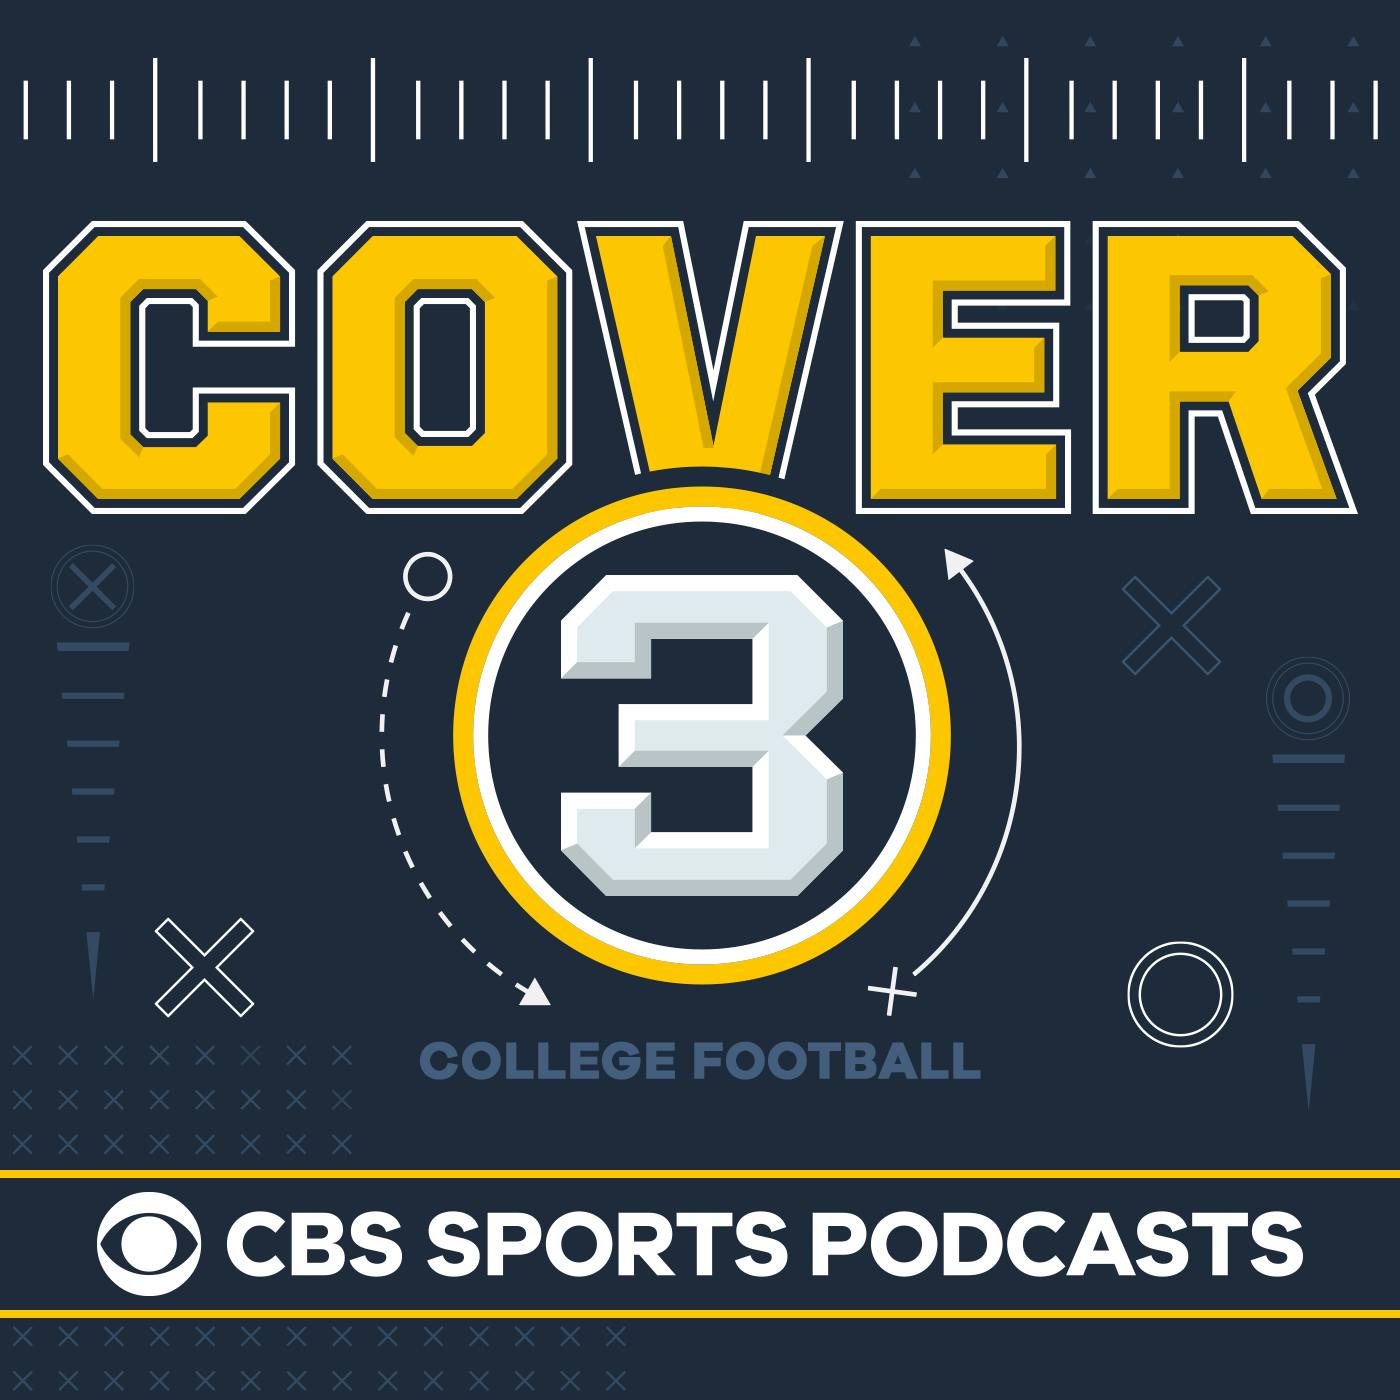 Cover 3 College Football podcast show image